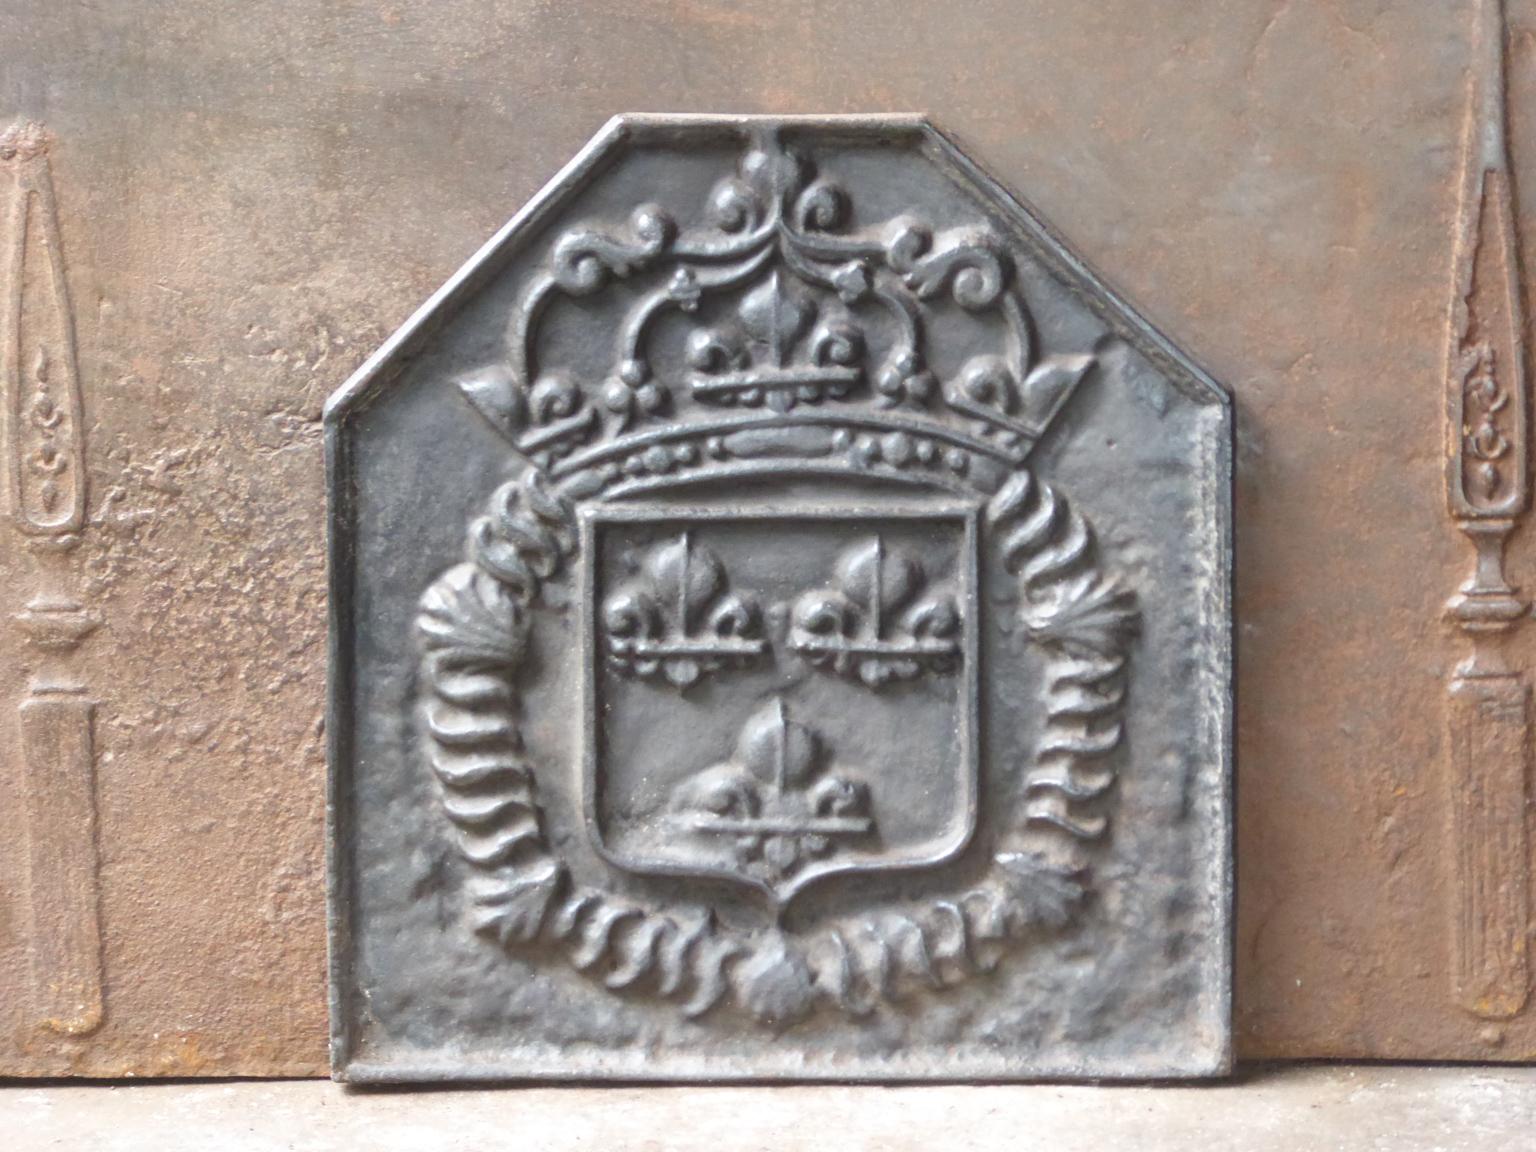 Coat of arms of the House of Bourbon, an originally French Royal house that became a major dynasty in Europe. It delivered kings for Spain (Navarra), France, both Sicilies and Parma. Bourbon kings ruled France from 1589 up to the French revolution